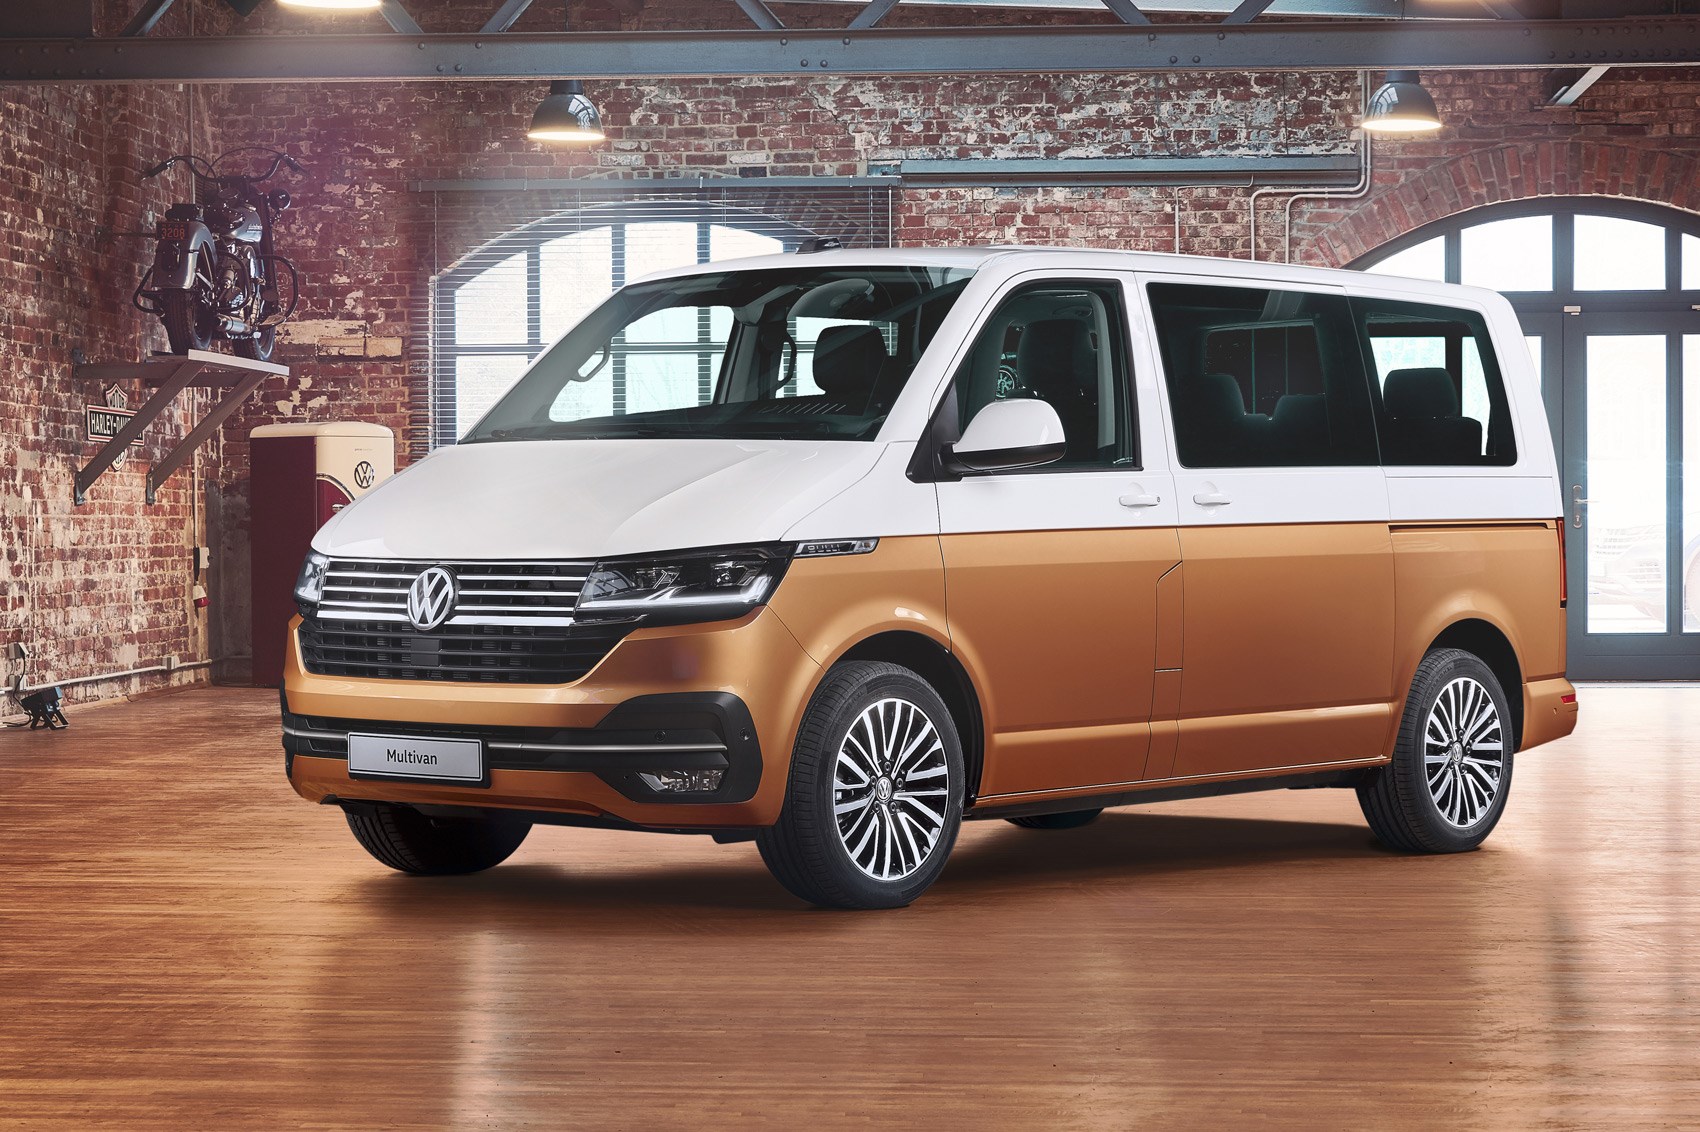 new VW T6.1 Caravelle unveiled for 2019 